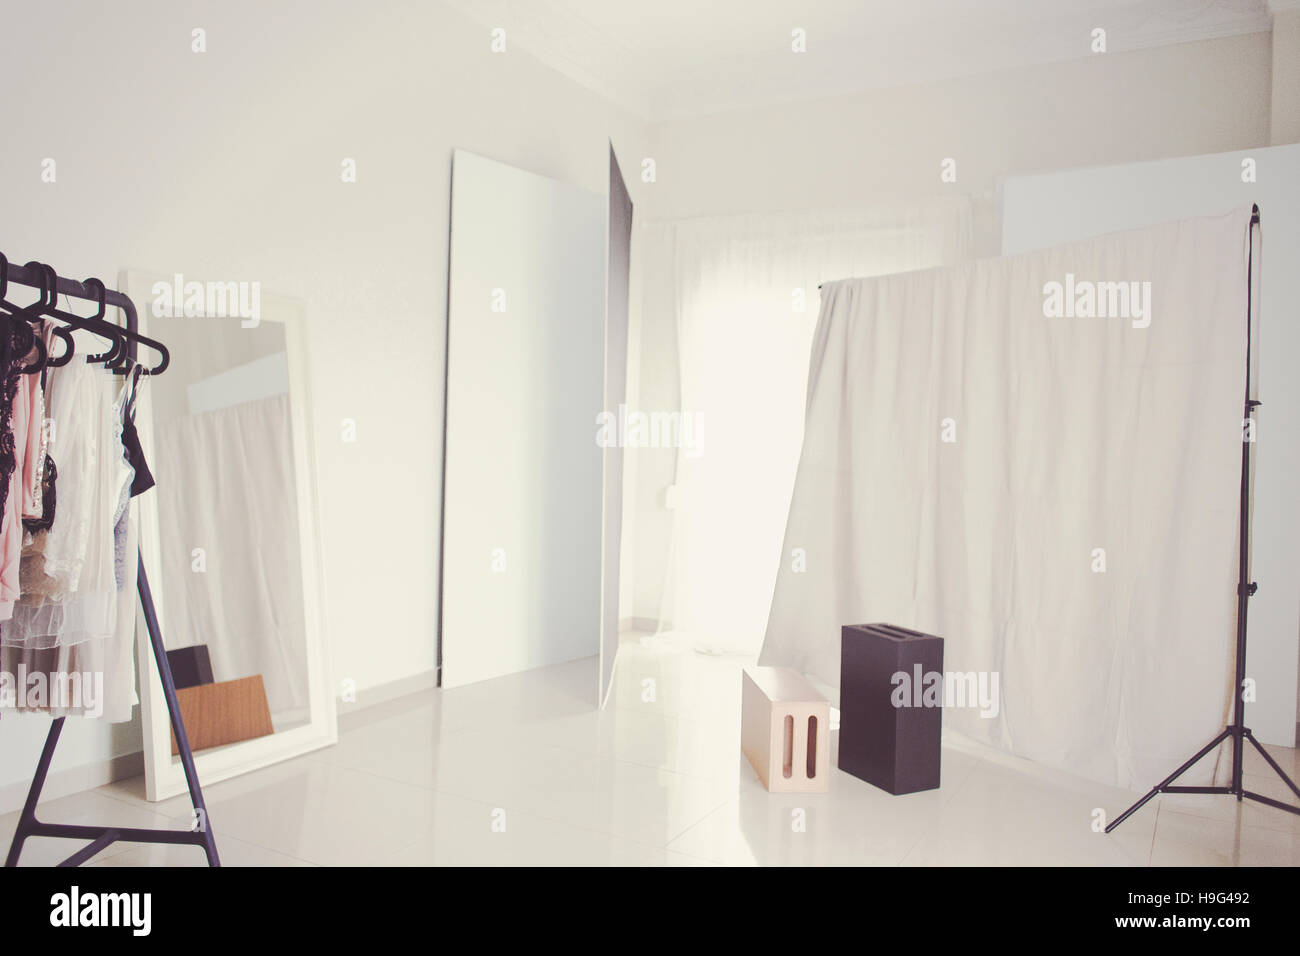 Space for photography studio with natural light Stock Photo